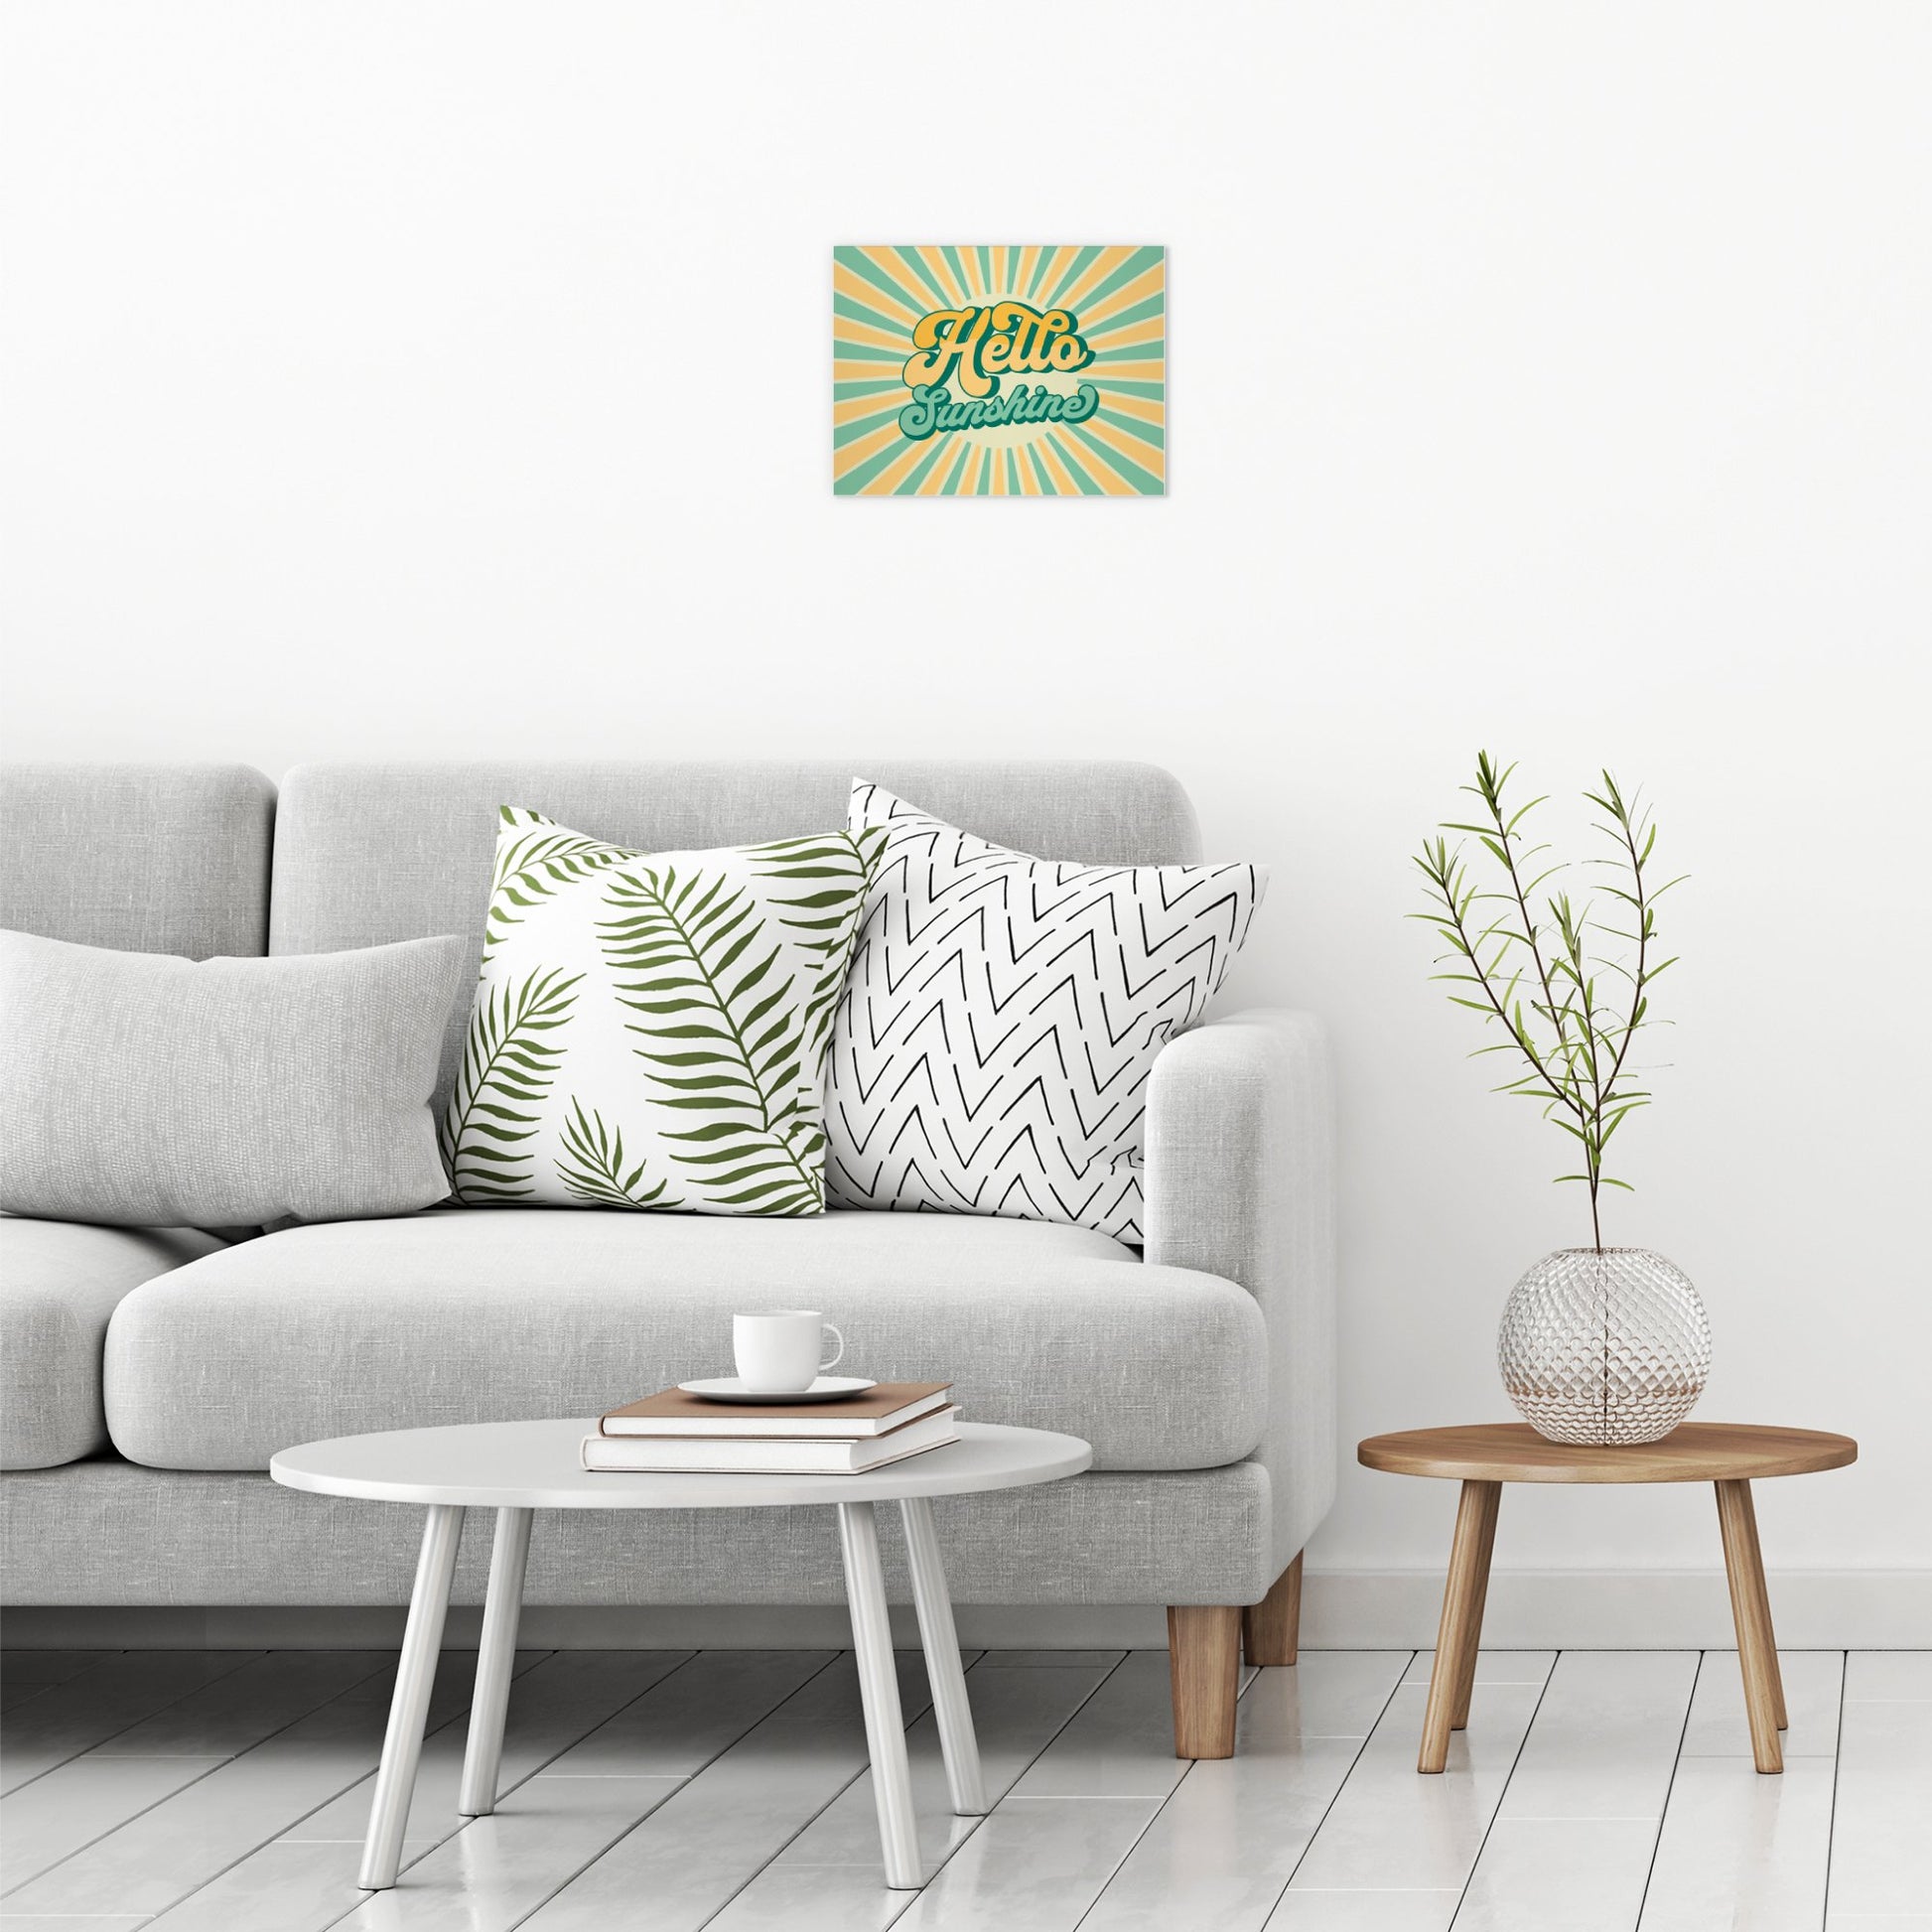 A contemporary modern room view showing a small size metal art poster display plate with printed design of a Hello Sunshine Quote